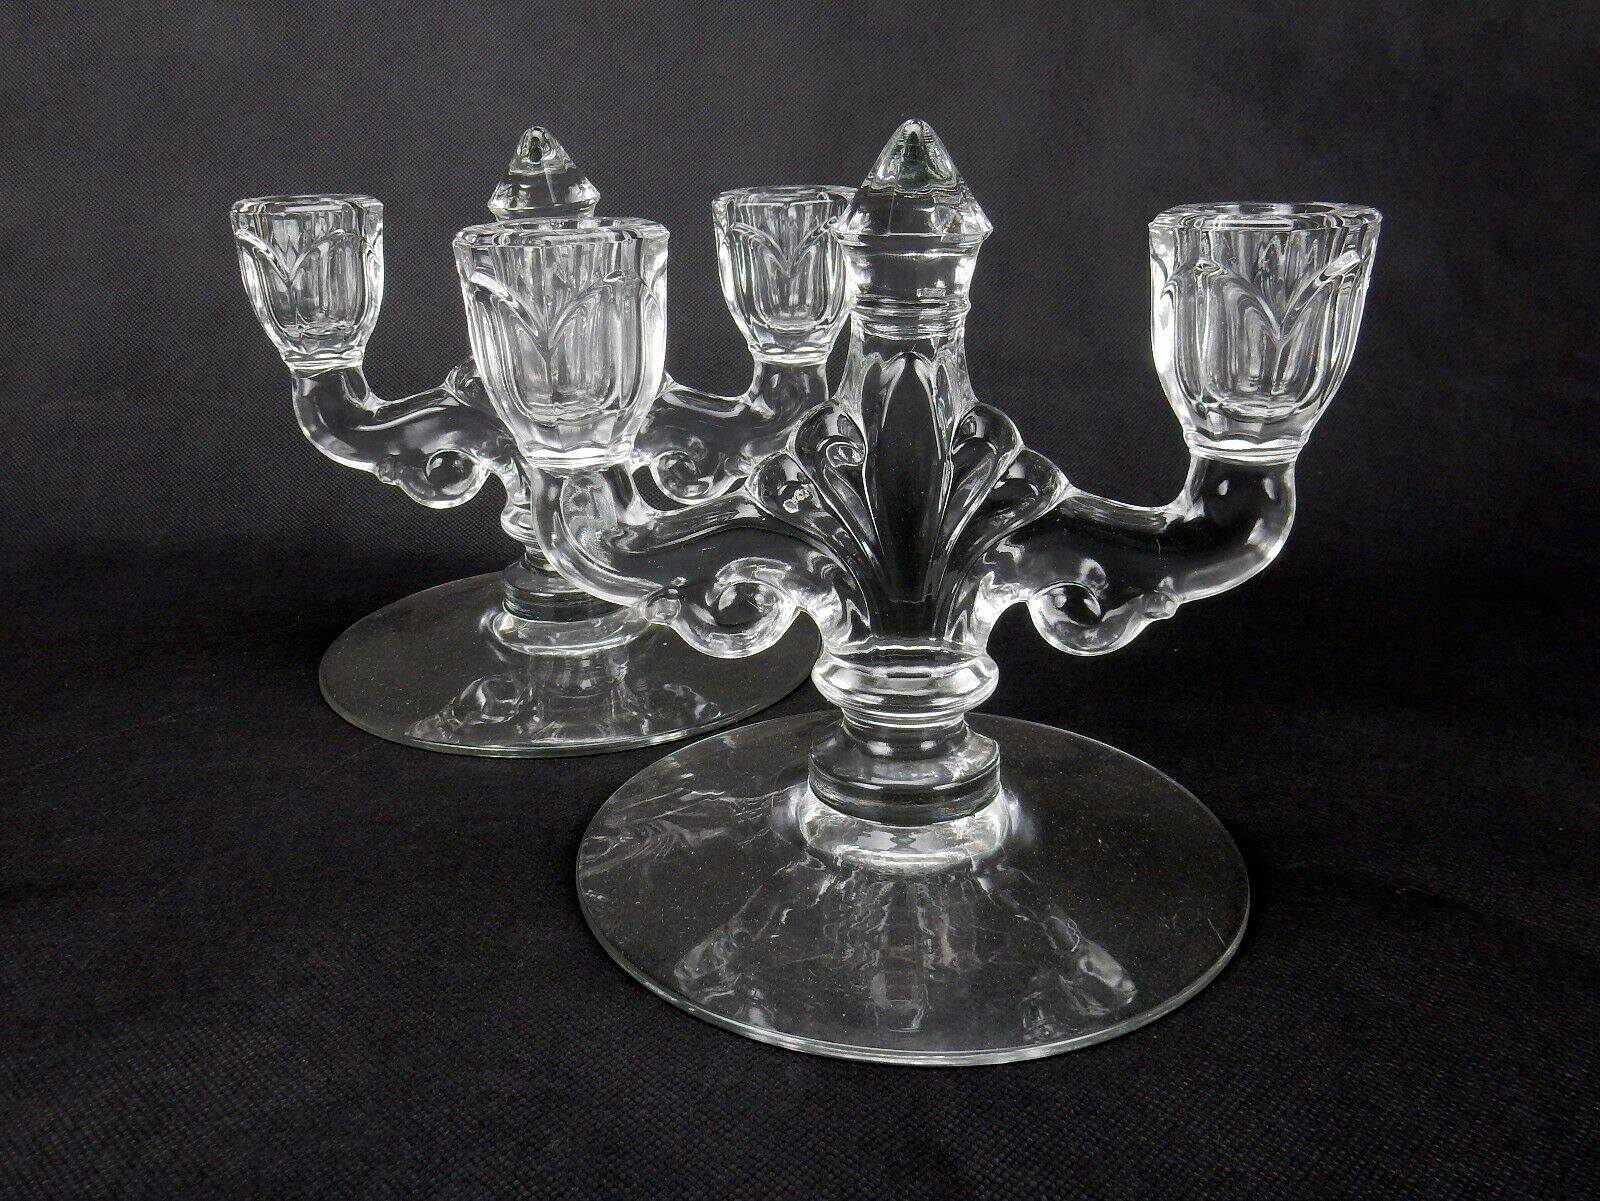 Fostoria Vintage Double Candle Holders, Fostoria Crystal Candle Holder Pair - $29.35